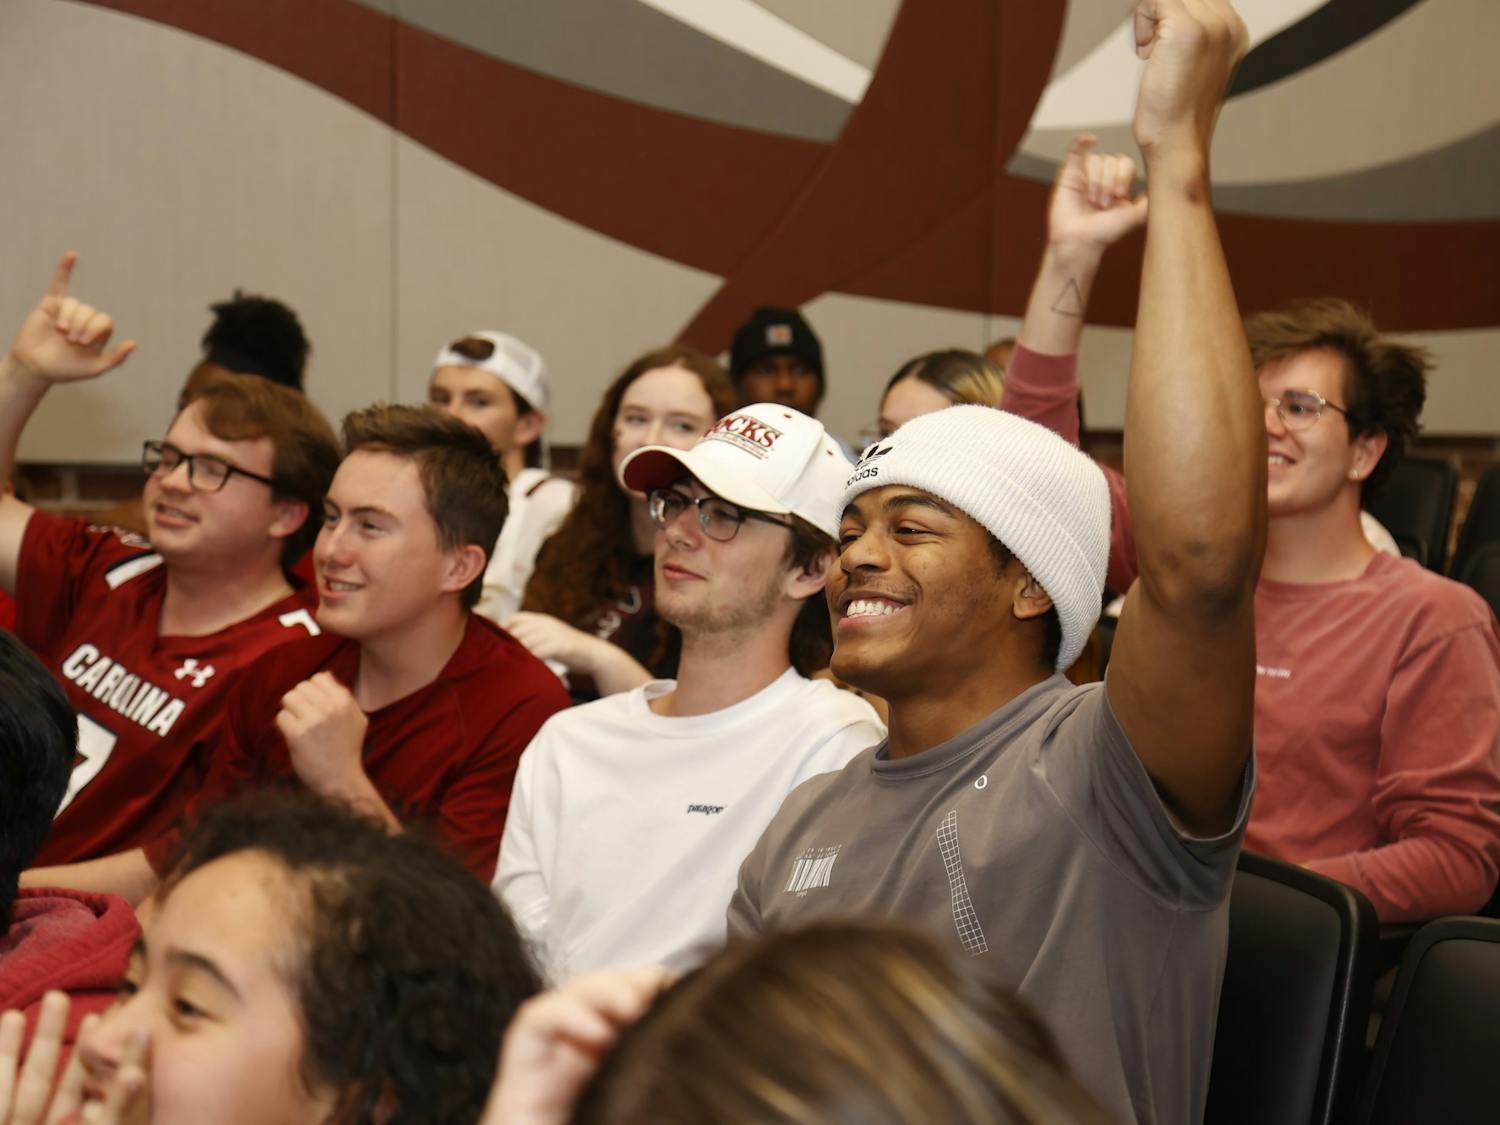 South Carolina students cheer on the women’s basketball team at a watch party in the Russell House Theater on April 3, 2022. The watch party was hosted by Gamecock Entertainment. &nbsp;